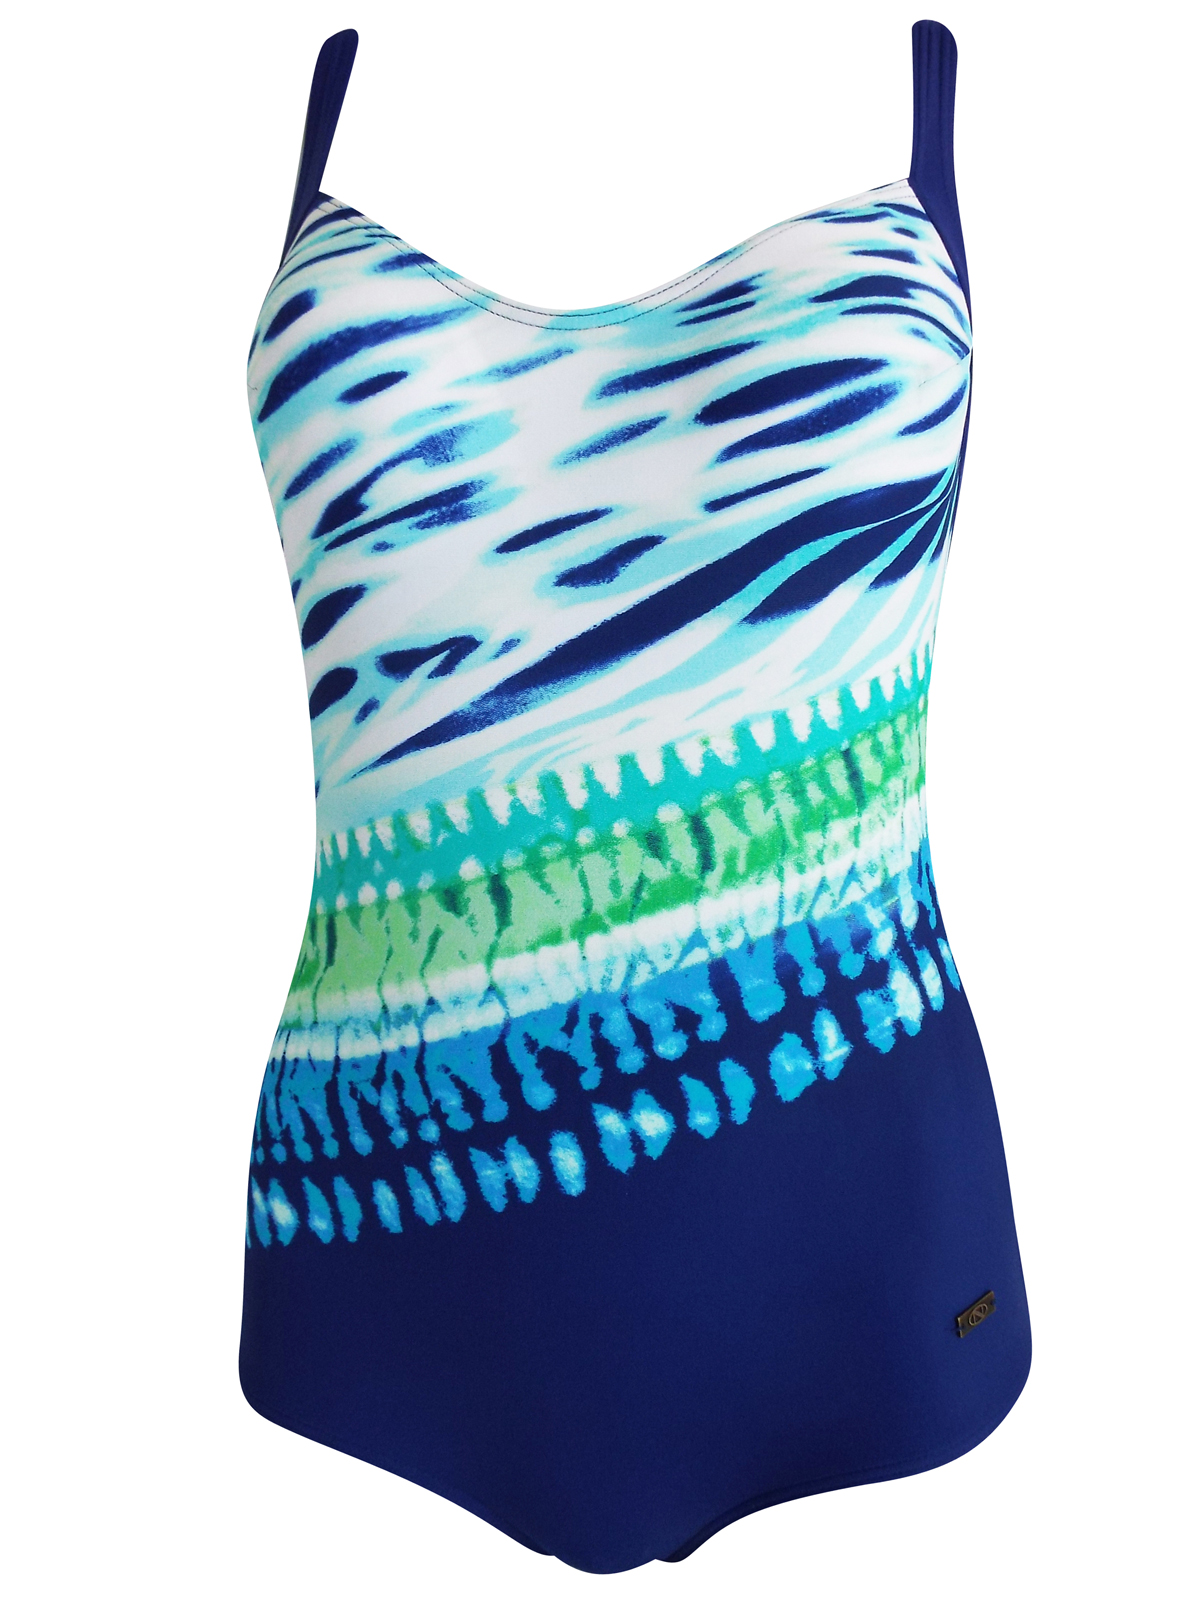 Naturana - - Naturana BLUE Non-Wired Moulded Cups Printed Swimsuit ...